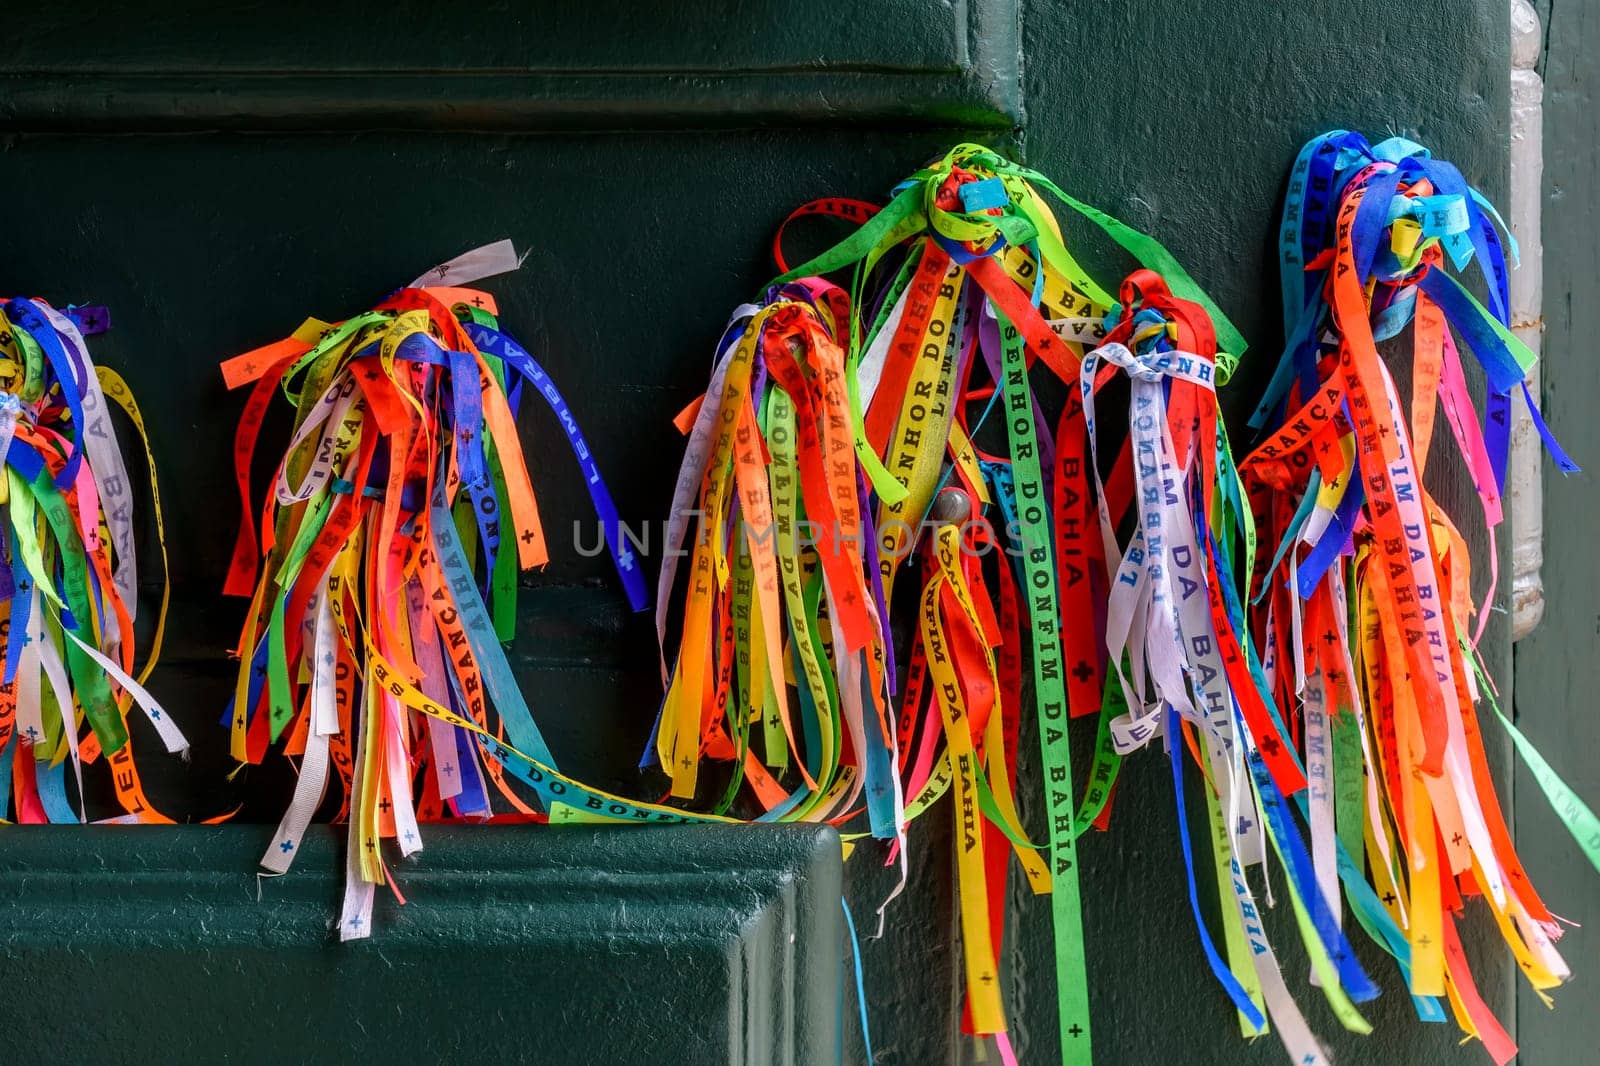 Colorful ribbons of our lord do Bonfim by Fred_Pinheiro